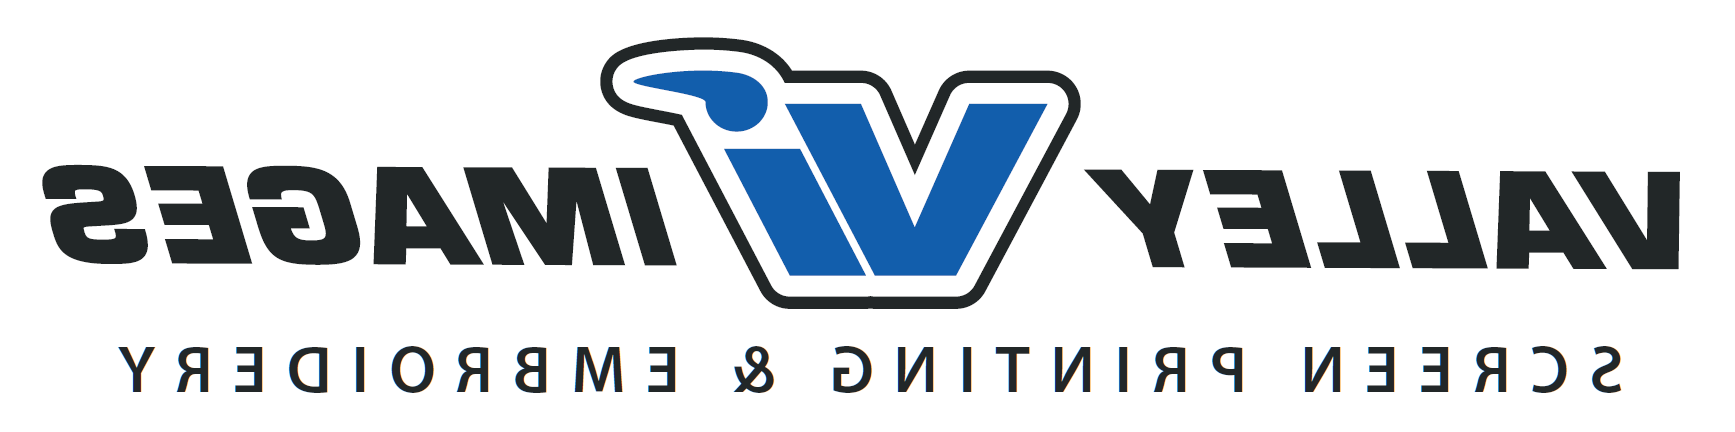 Valley Images logo: the letters V and I in blue, interlinked at the center and outlined in black, with the word Valley to the left and Images to the right, both in a simple black font.